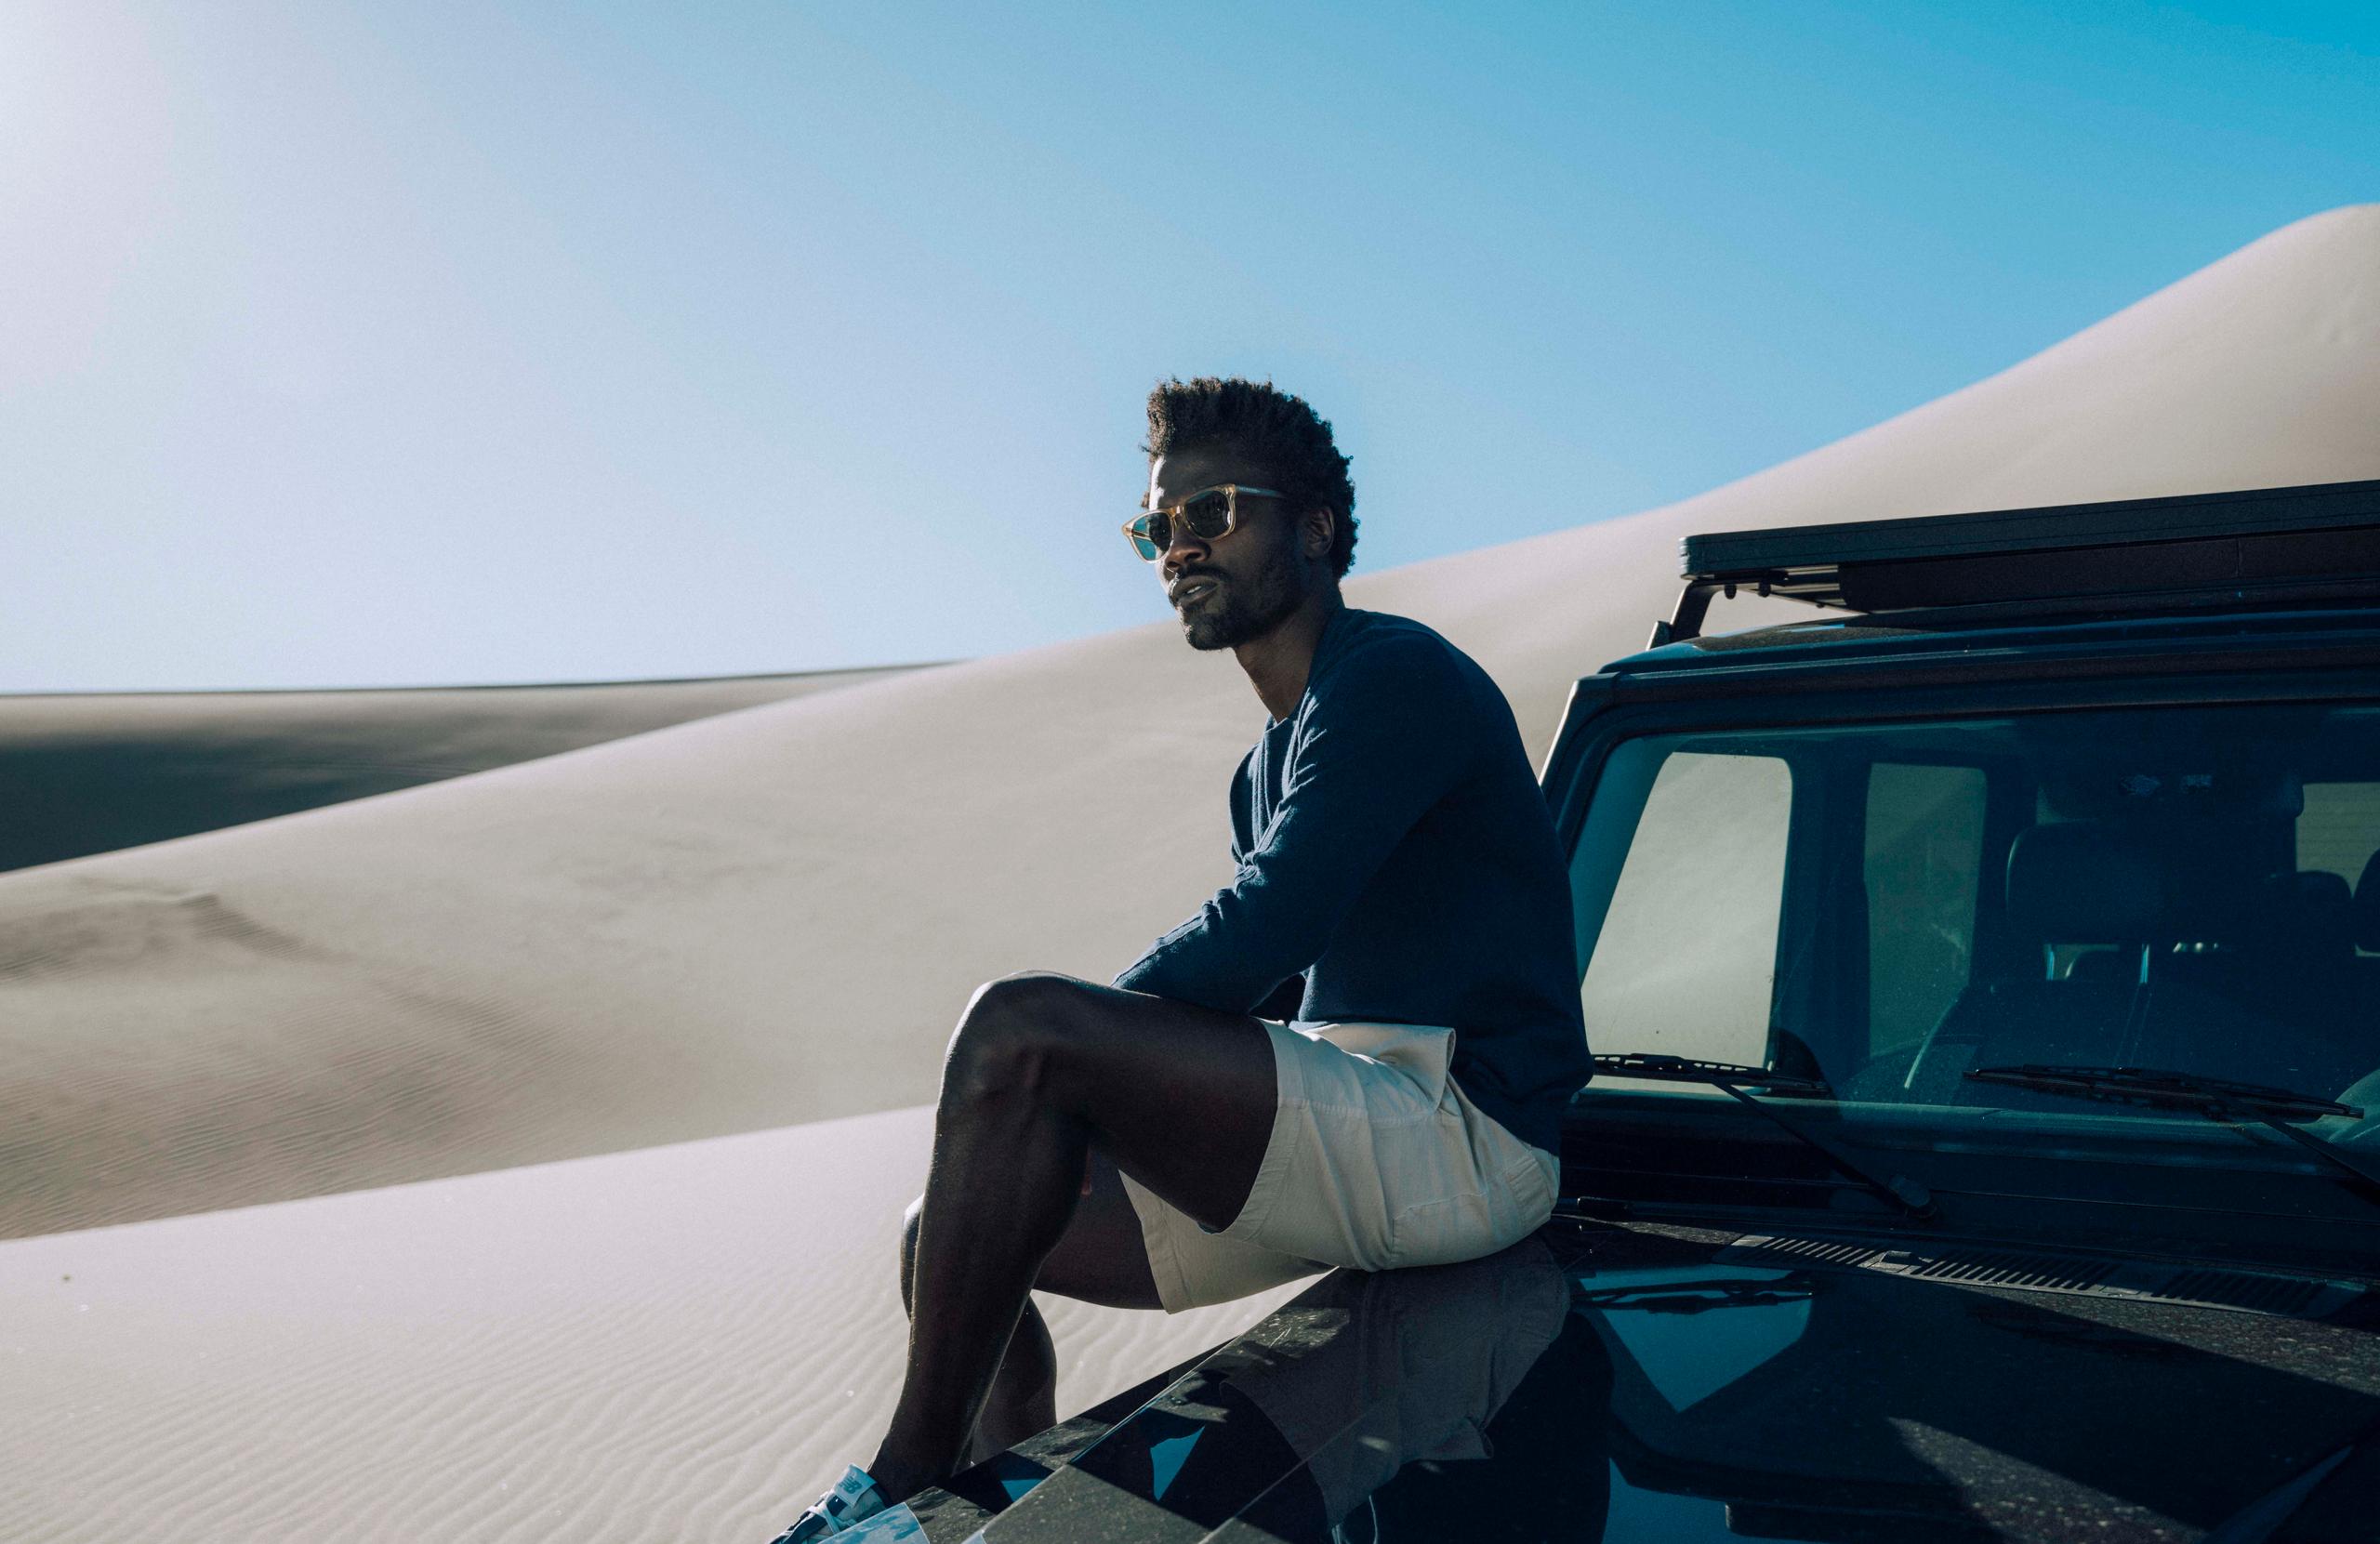 Man sitting on truck in middle of sand dunes landscape